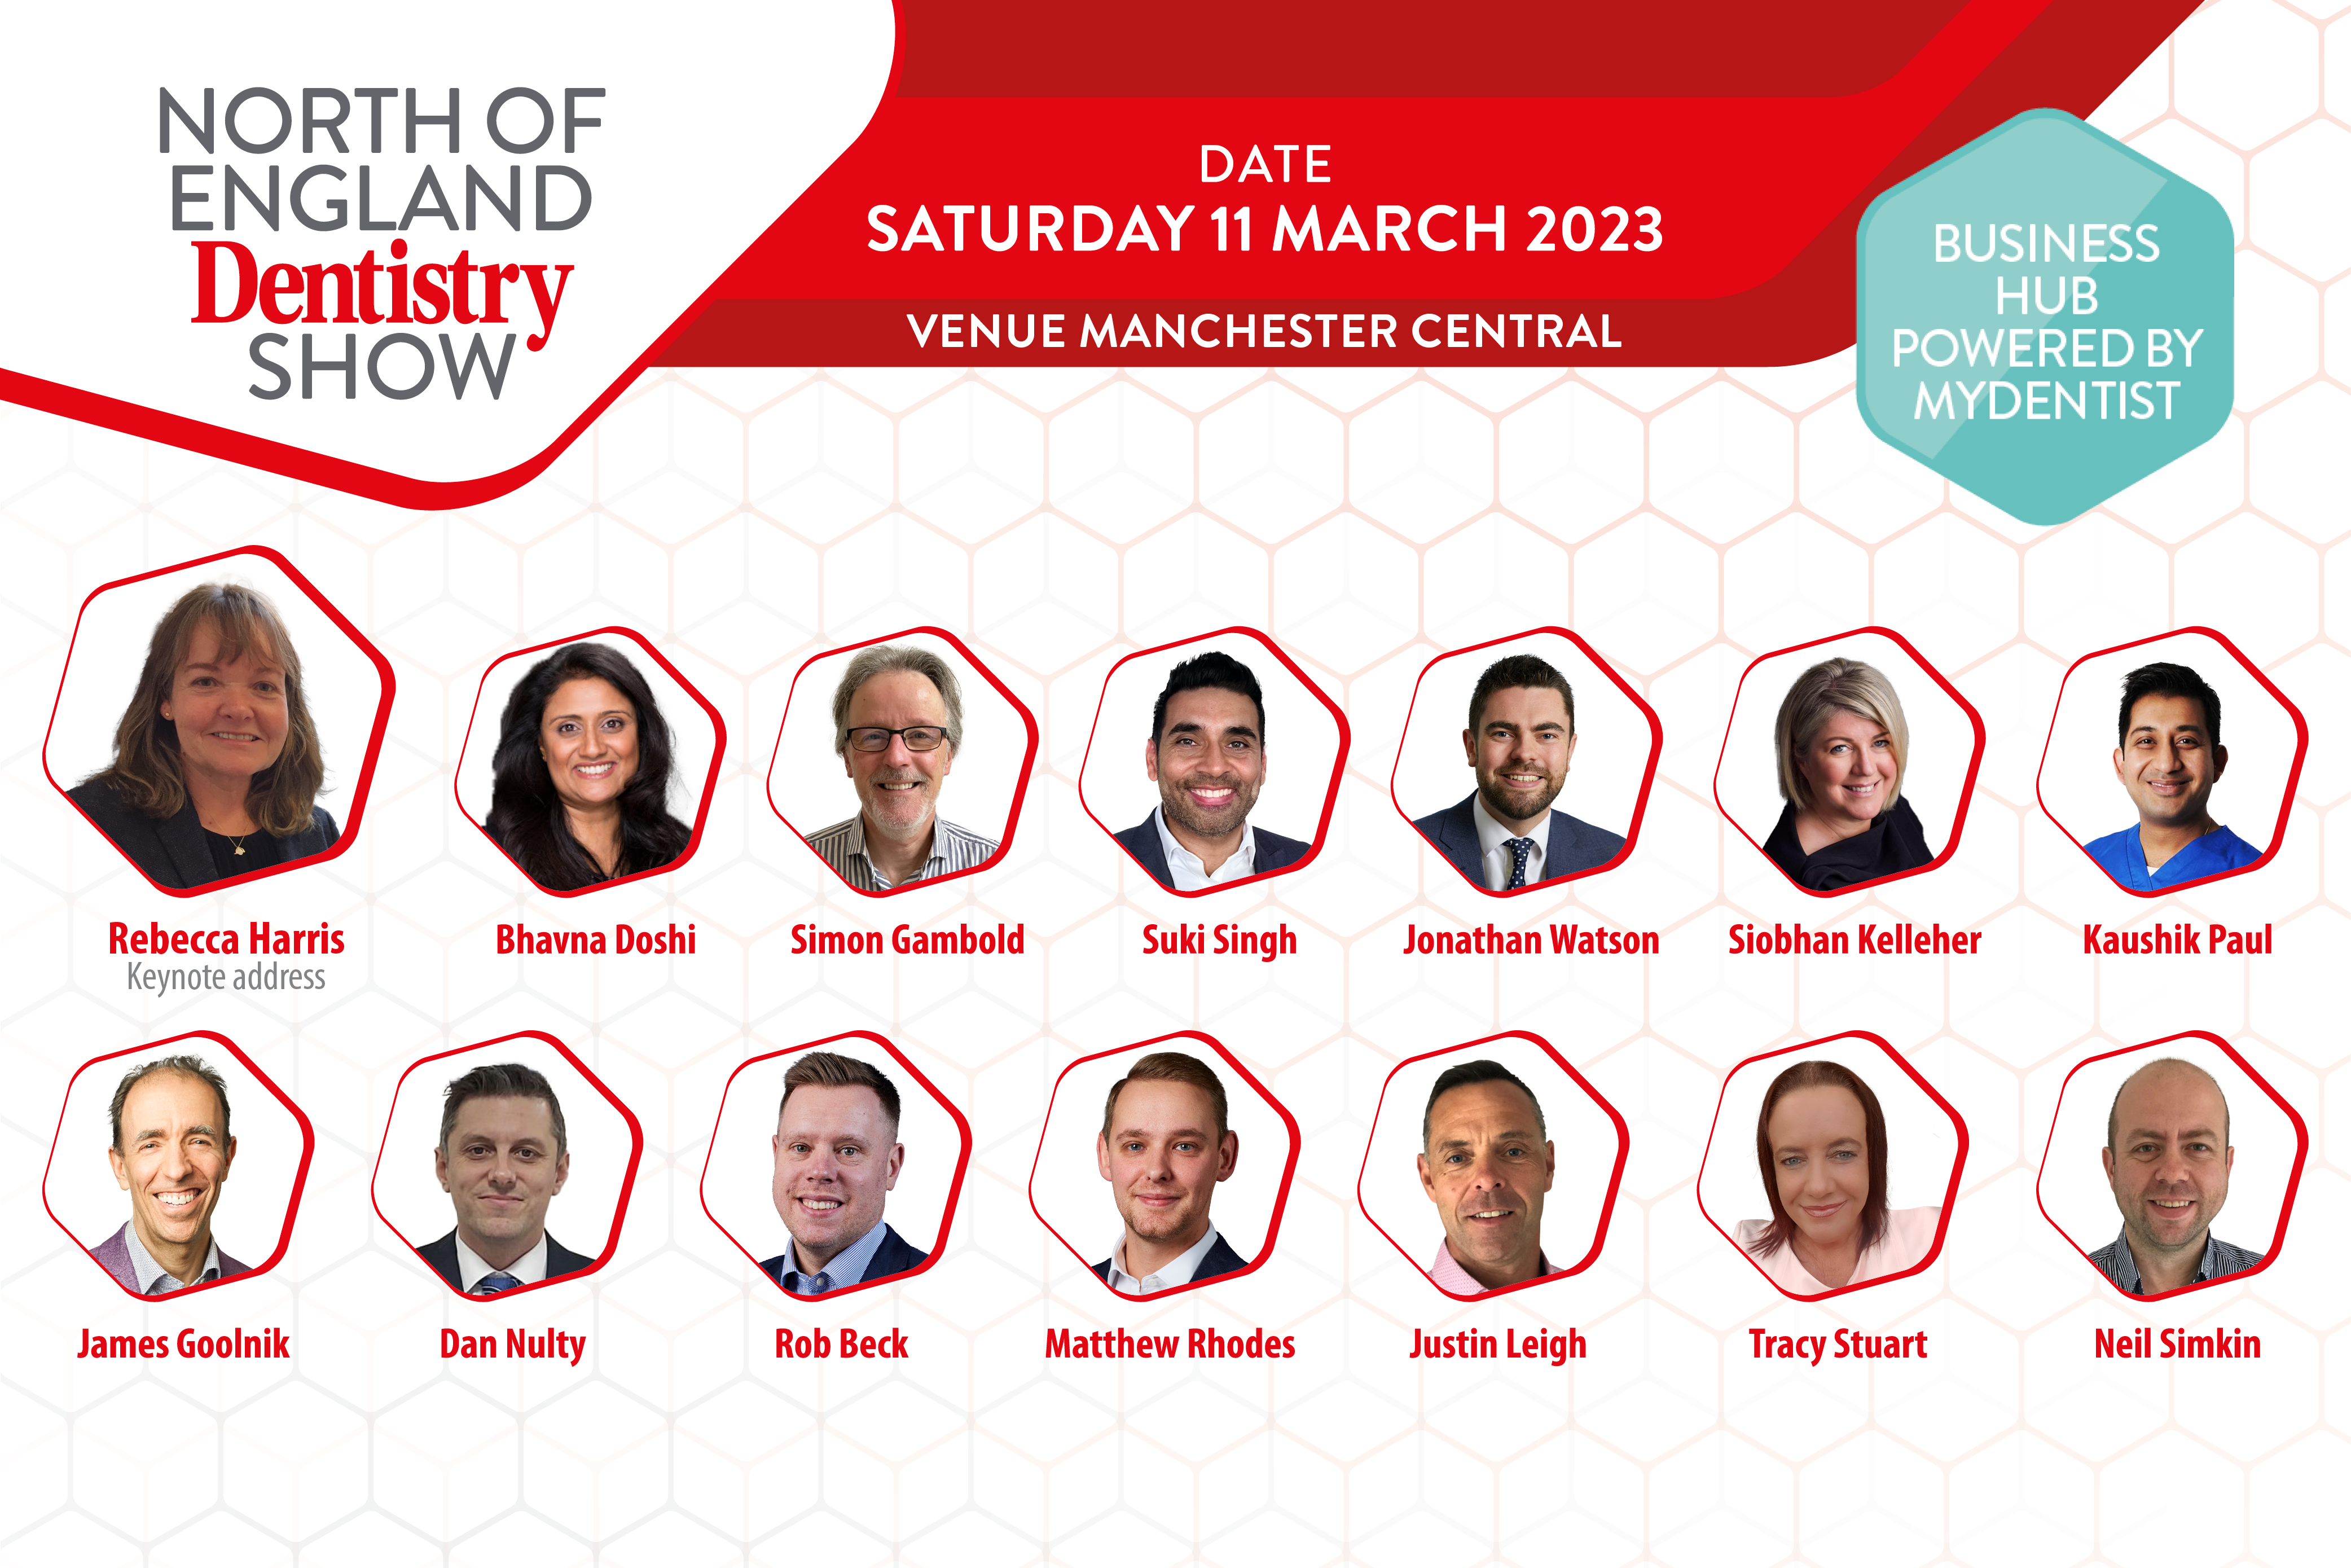 With 12 different theatres and over 85 speakers, you can't afford to miss the North of England Dentistry Show. Here we take a deep dive into the Business Hub – powered by Mydentist.